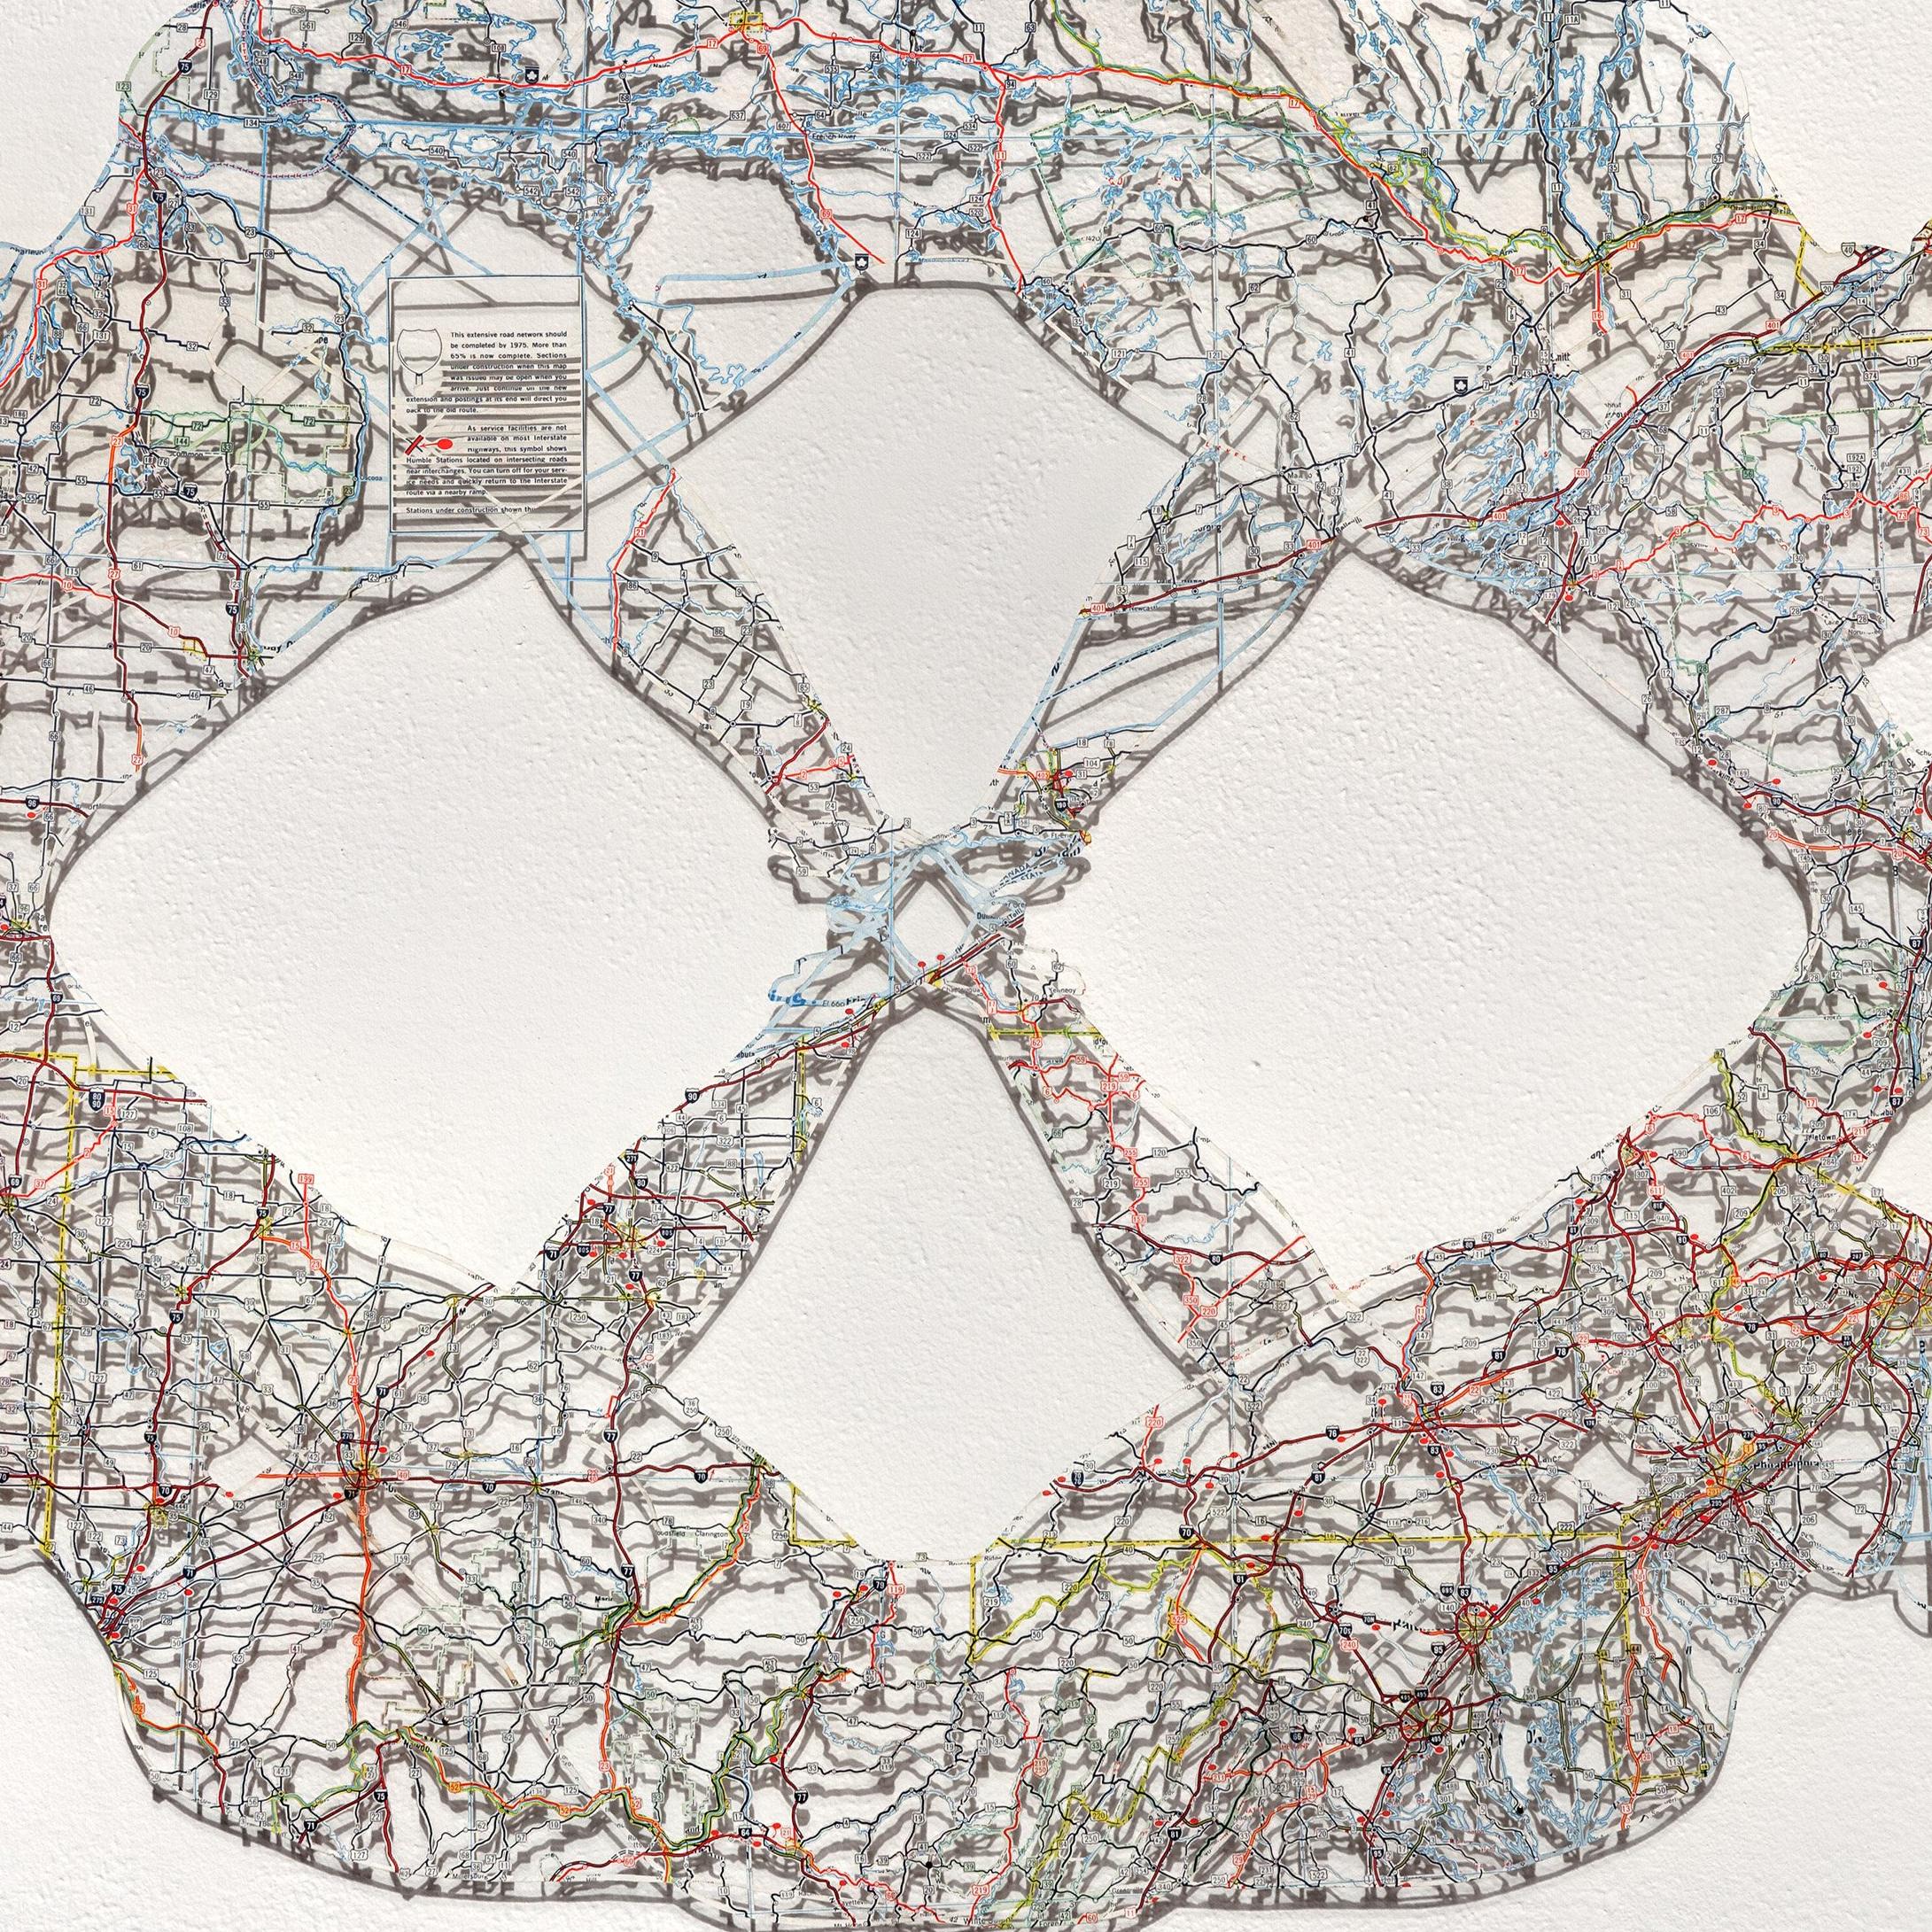 medium: hand-cut road map

The artist says of the inspiration in her latest work . . .
 
Moving to Washington, DC in 2016 changed me. The unraveling of this country's leadership elicited a strong, visceral reaction, and I spent the last year coming